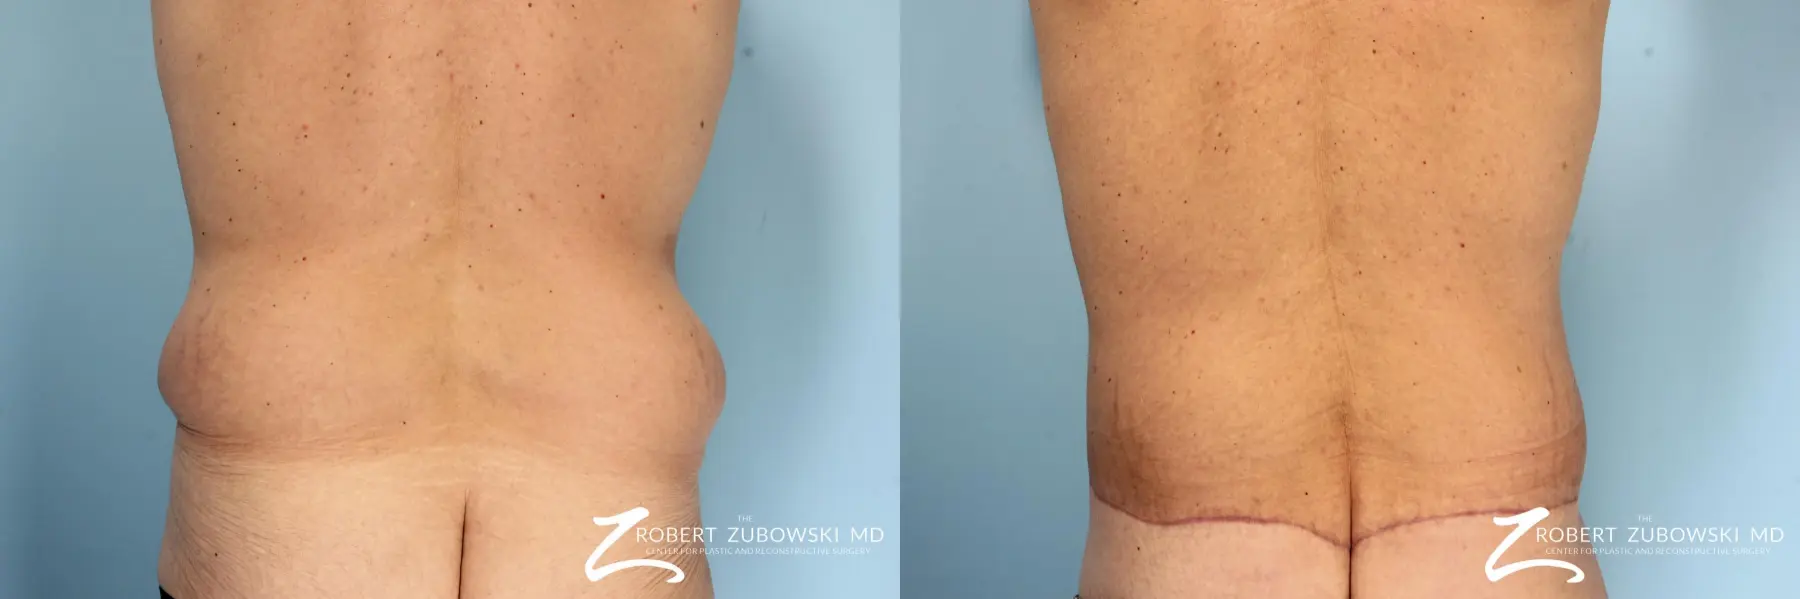 Body Lift For Men: Patient 1 - Before and After 2